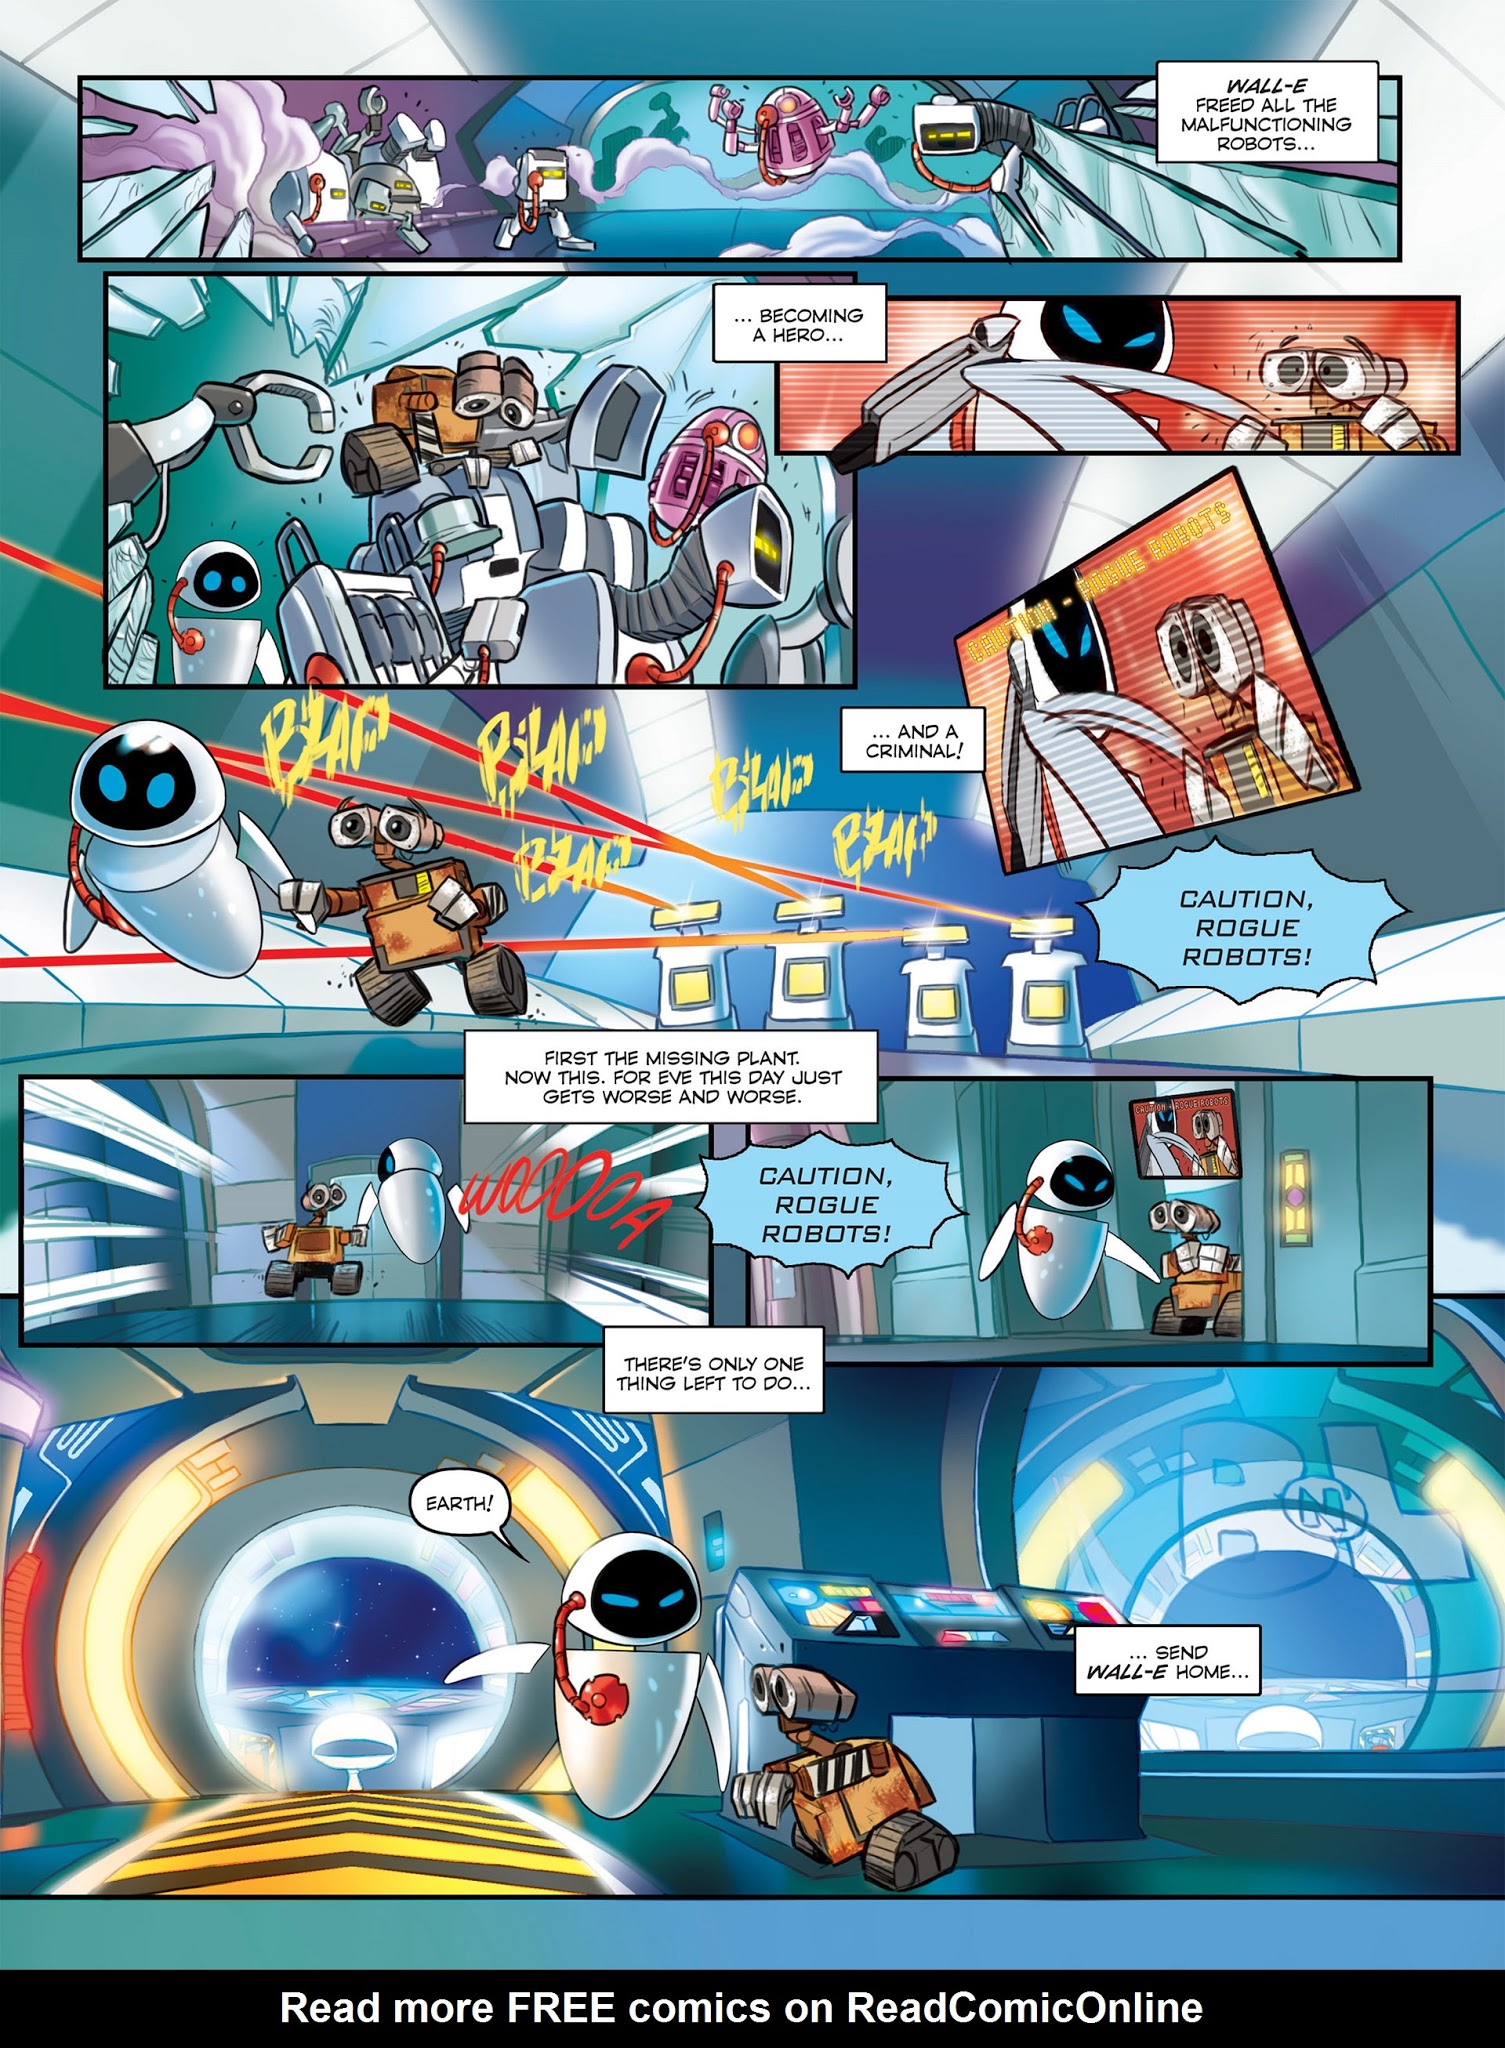 Read online WALL-E comic -  Issue # Full - 26